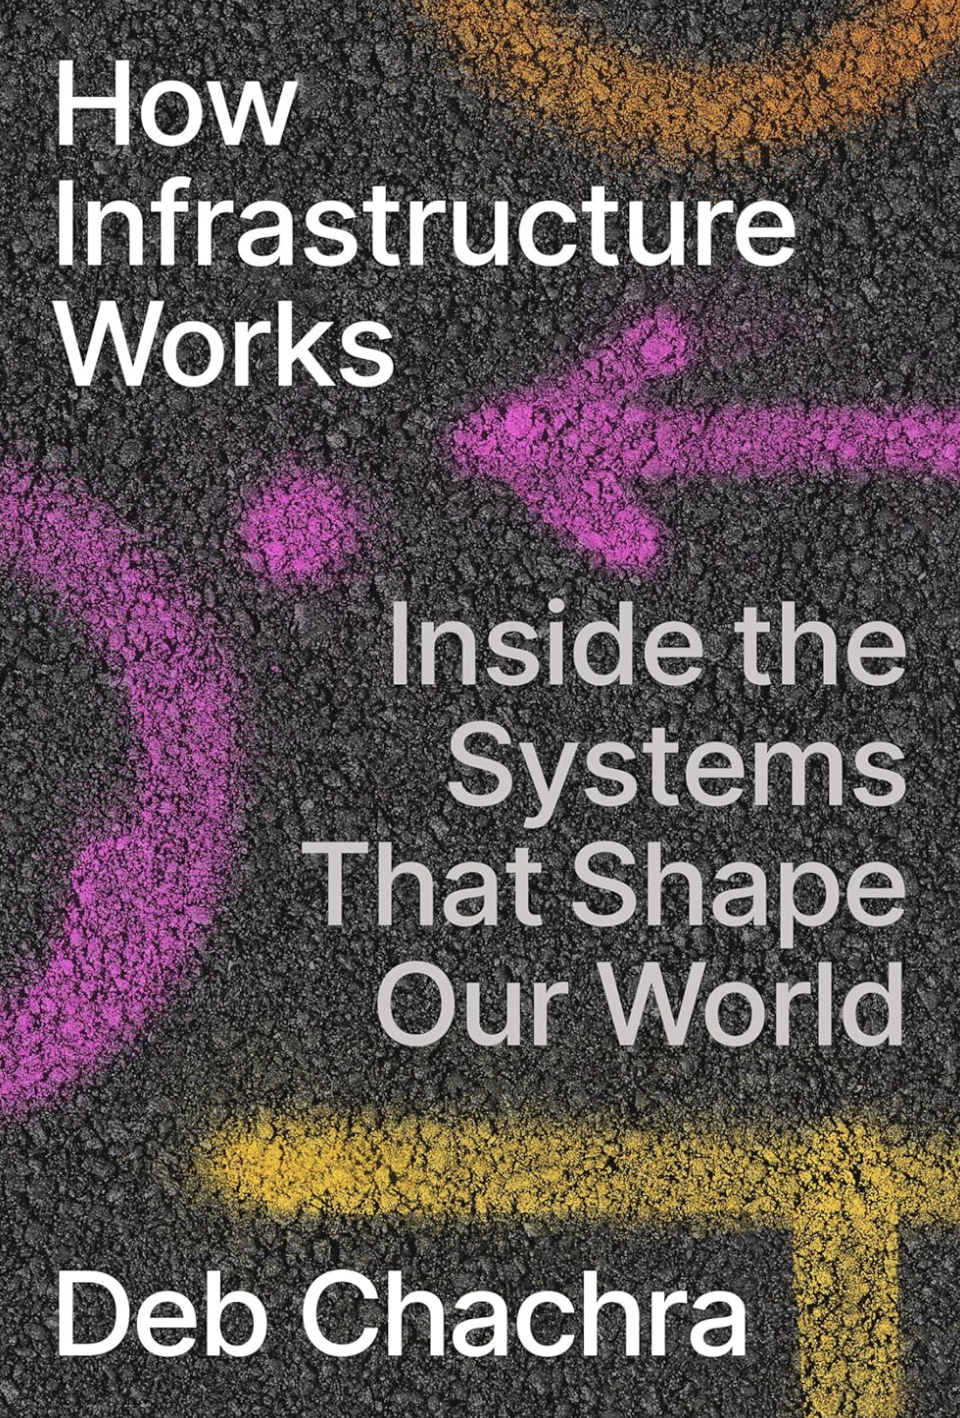 Book cover: "How Infrastructure Works."